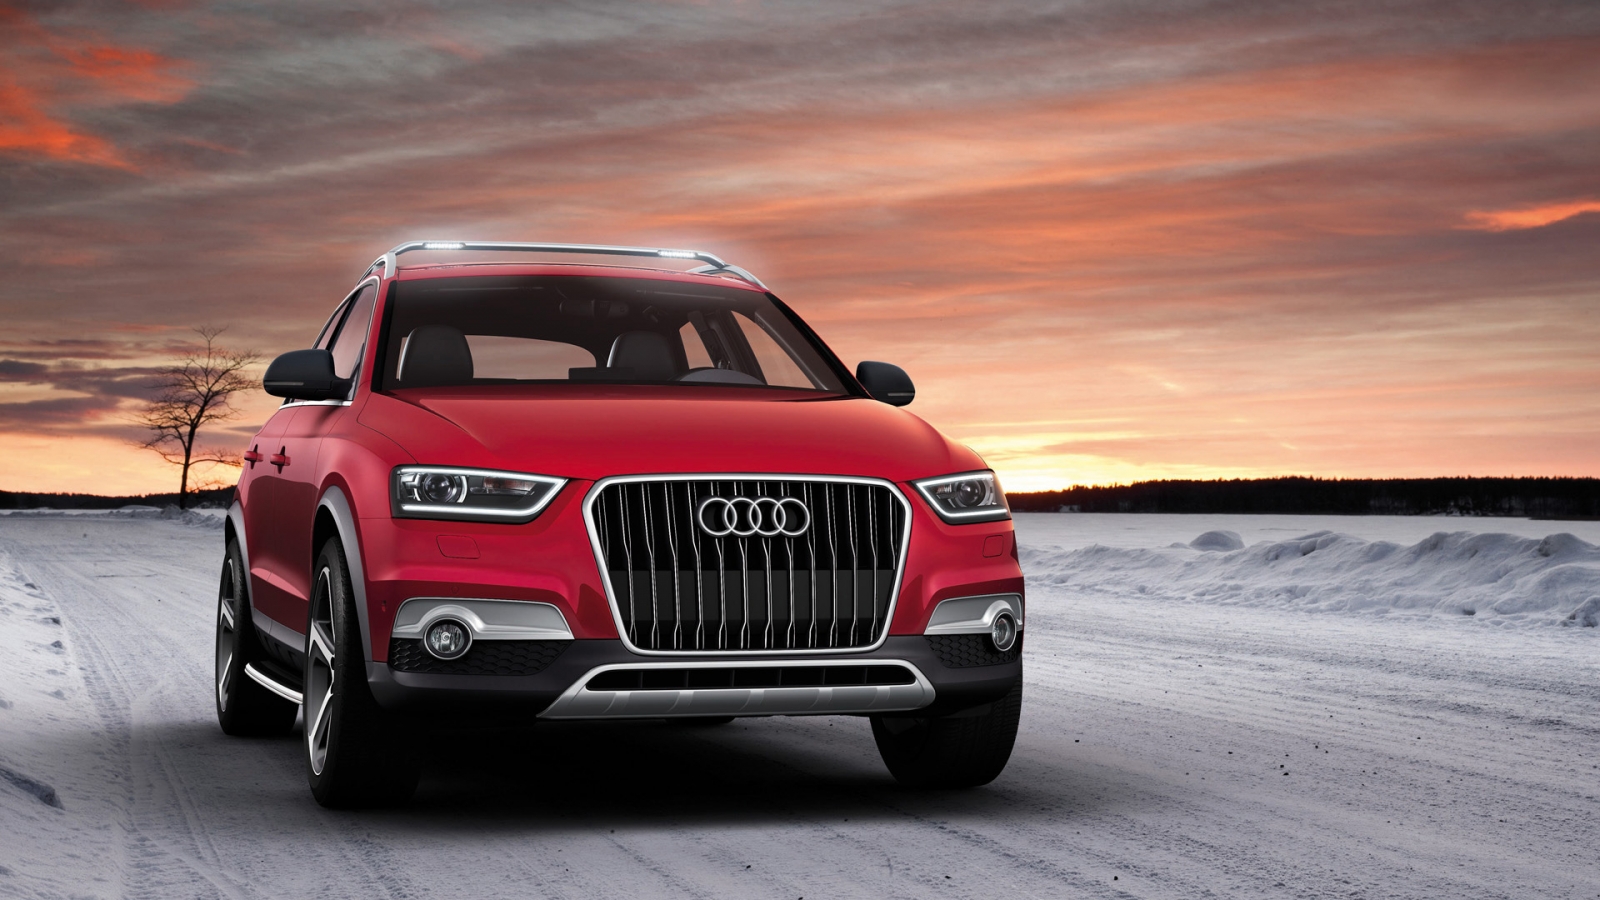 2012 Audi Q3 Vail Front for 1600 x 900 HDTV resolution